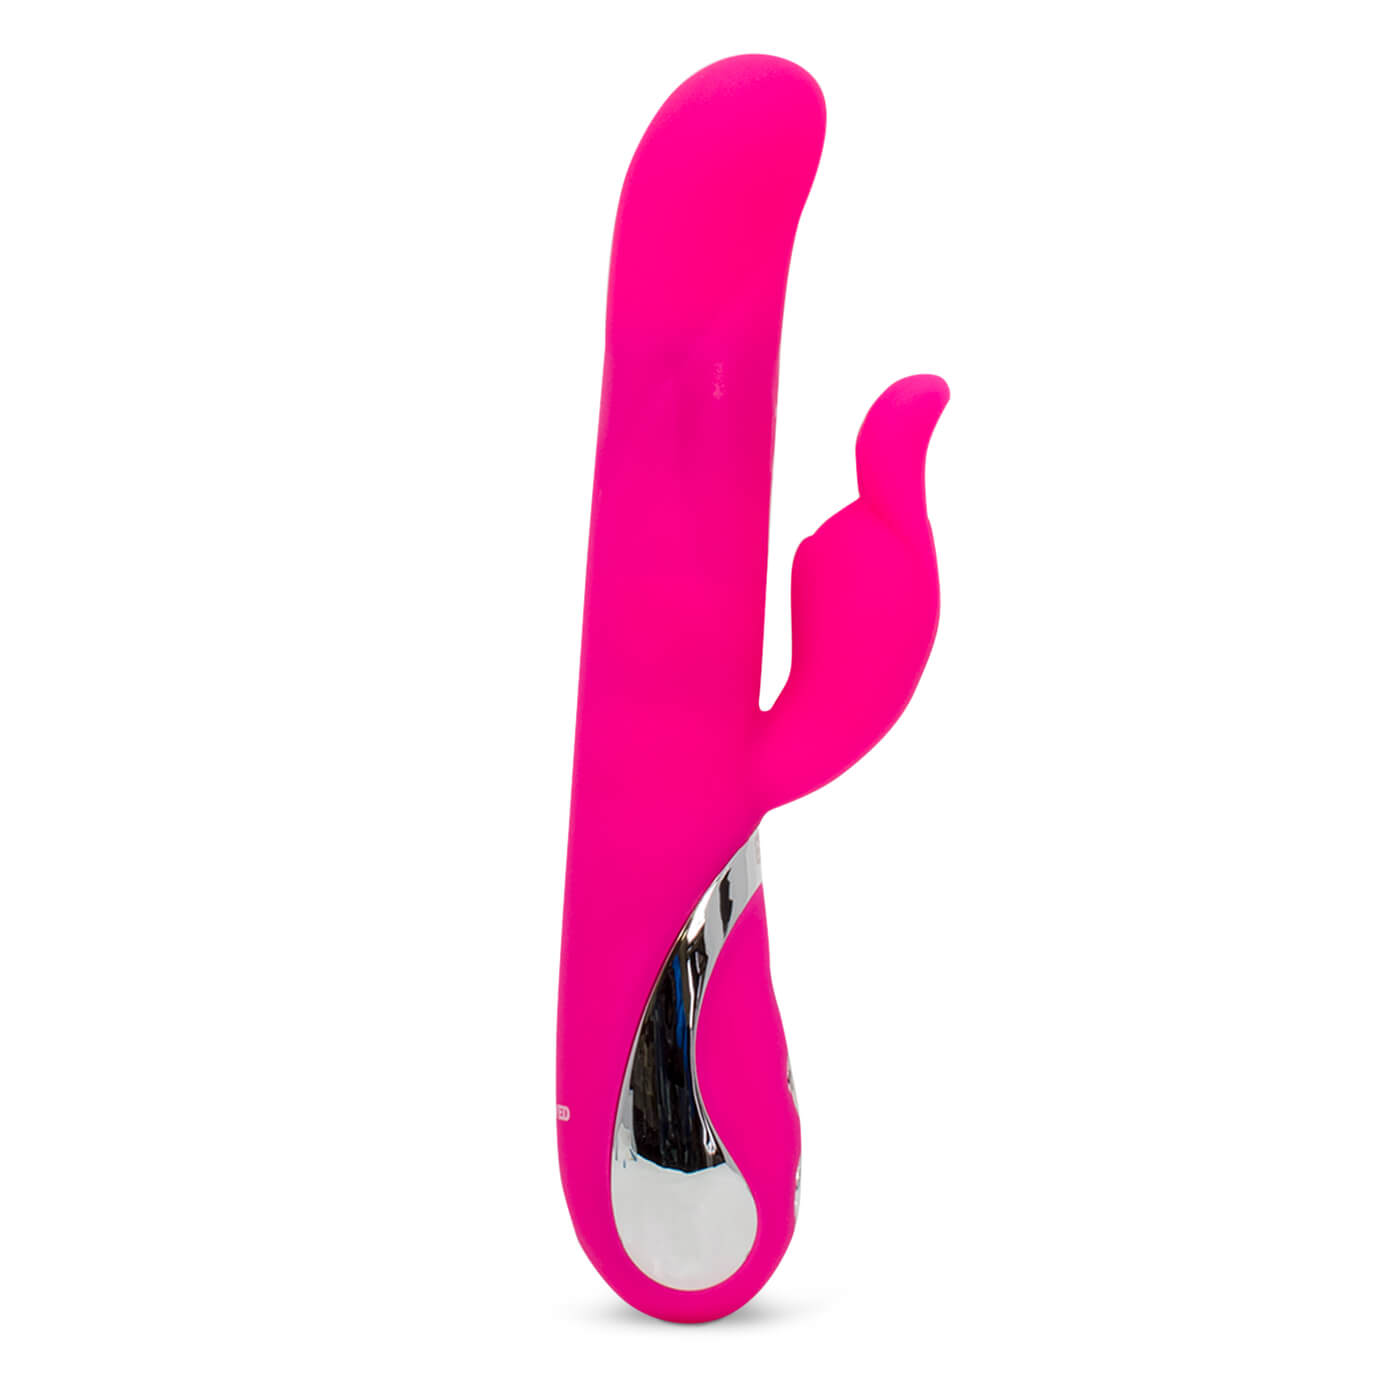 Evolved Novelties Pearly USB Rechargeable 5 Function Extra Quiet Rabbit Vibrator